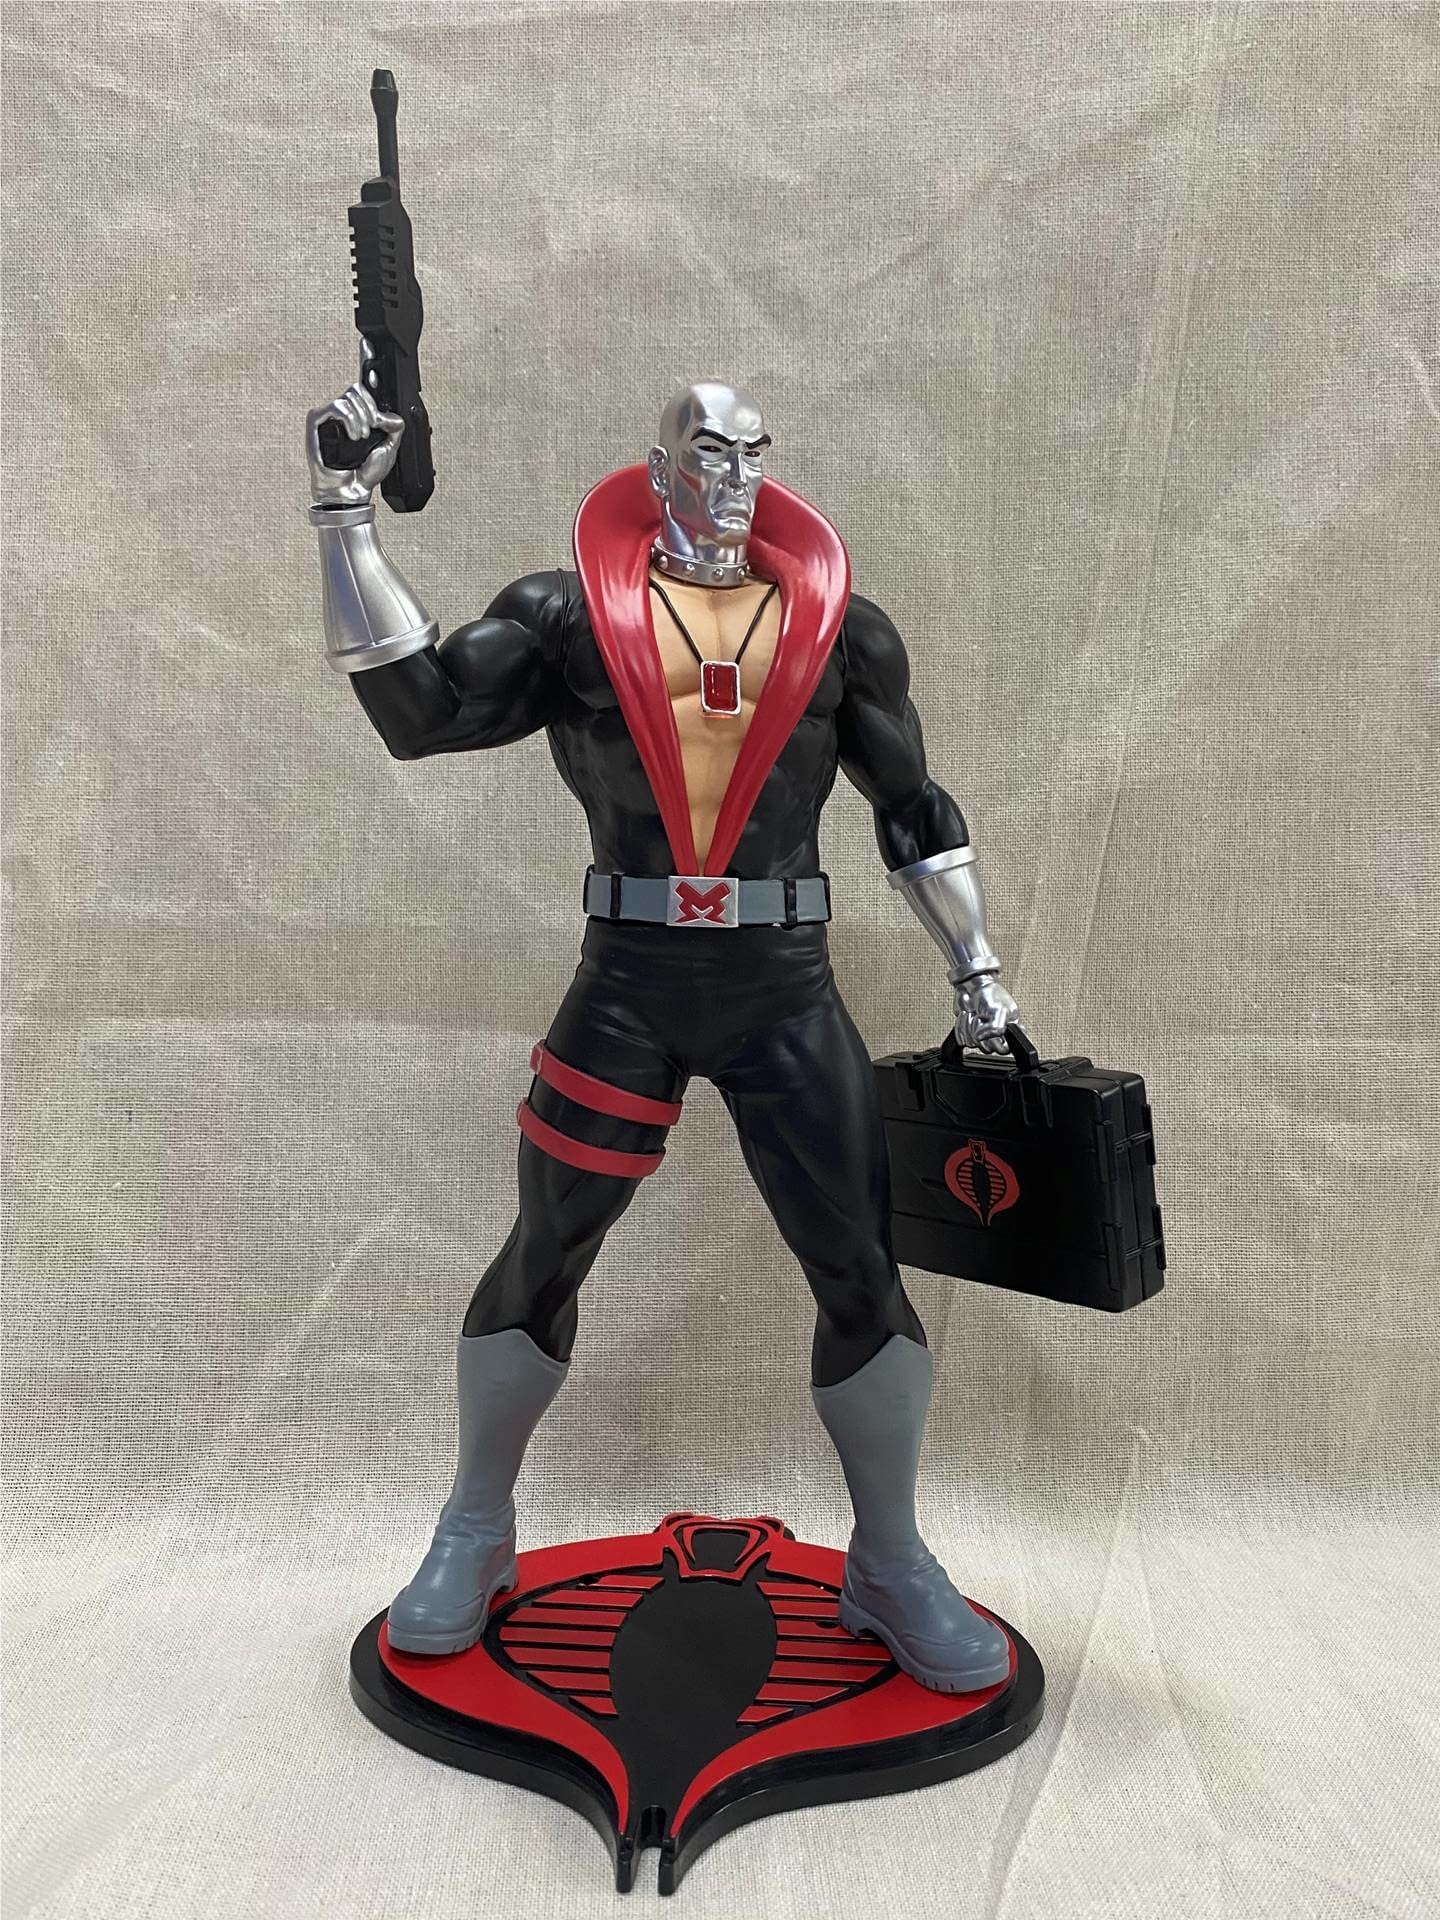 G.I. Joe Reigns Supreme with New Cobra Statues from PCS Collectibles